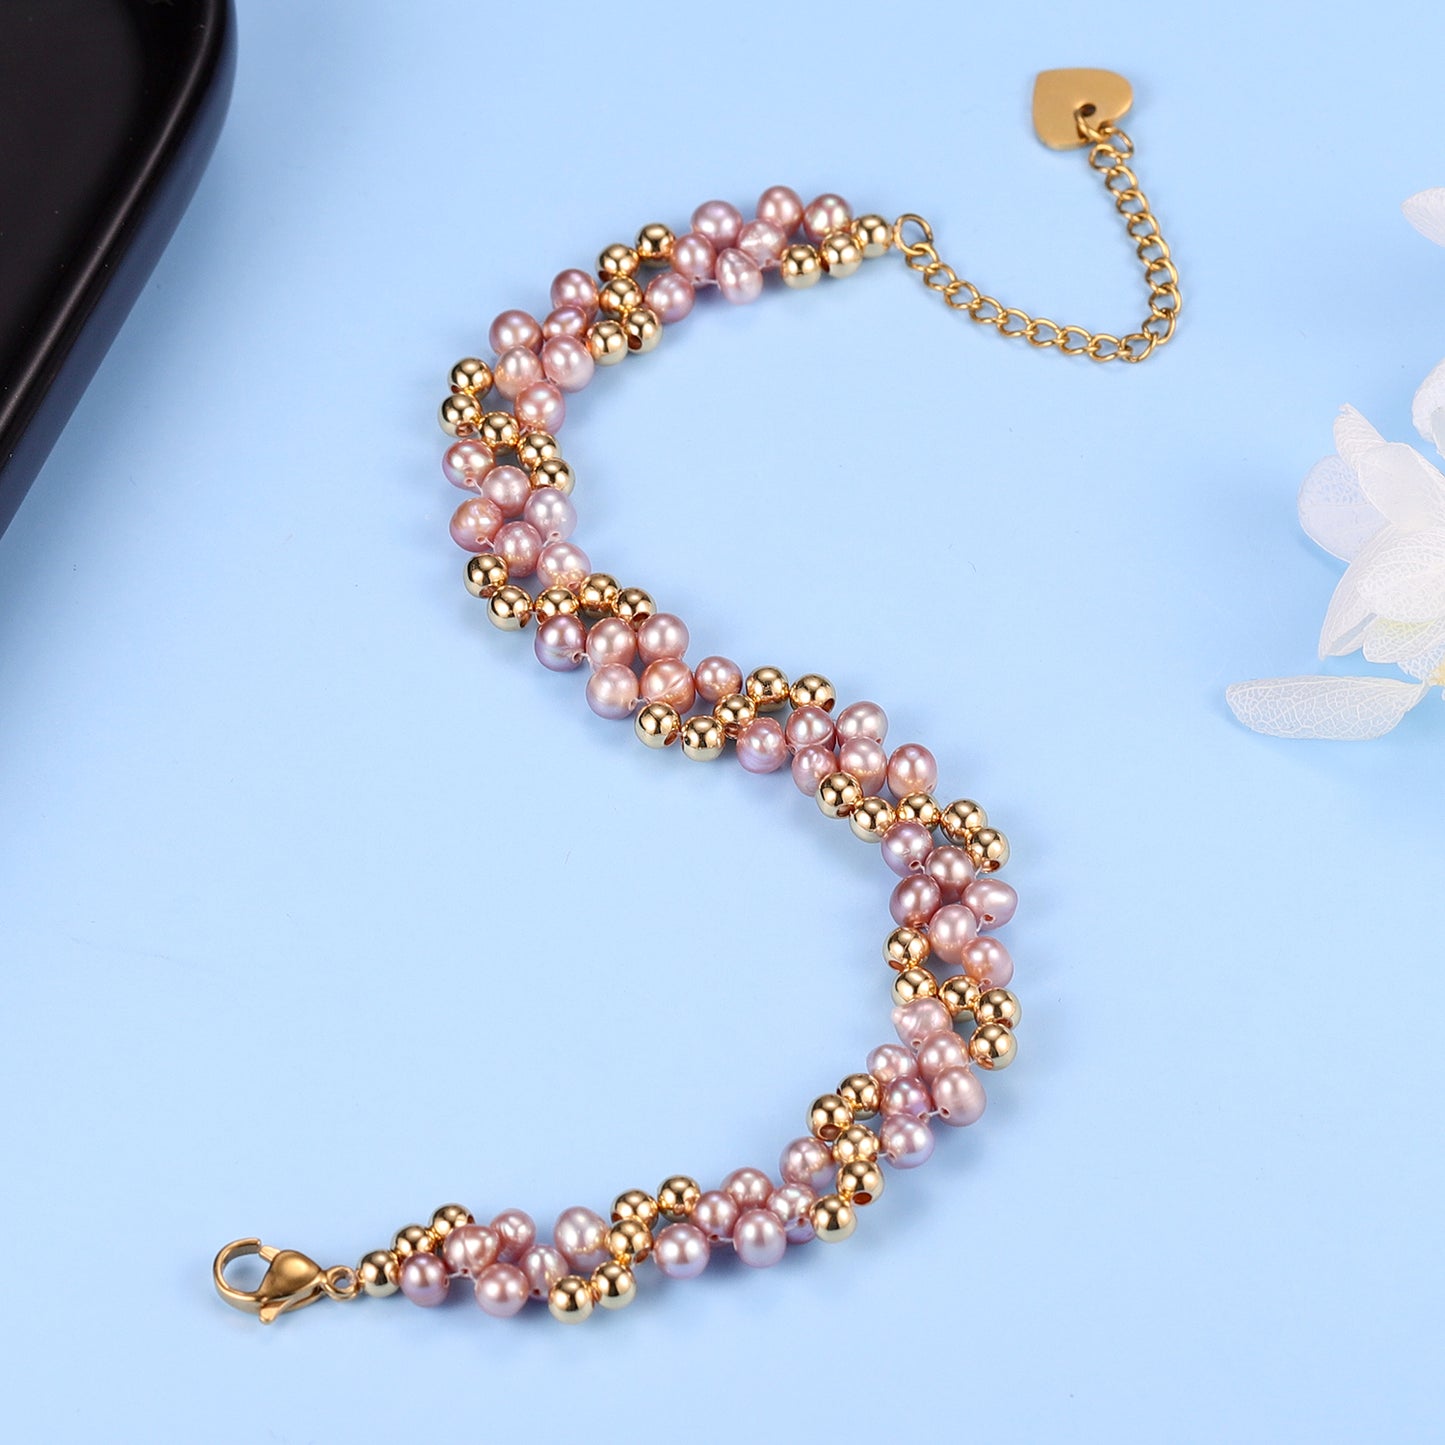 SAFANAH - Natural Freshwater Pearl Beads Bracelet - Gold Jewellery gifts